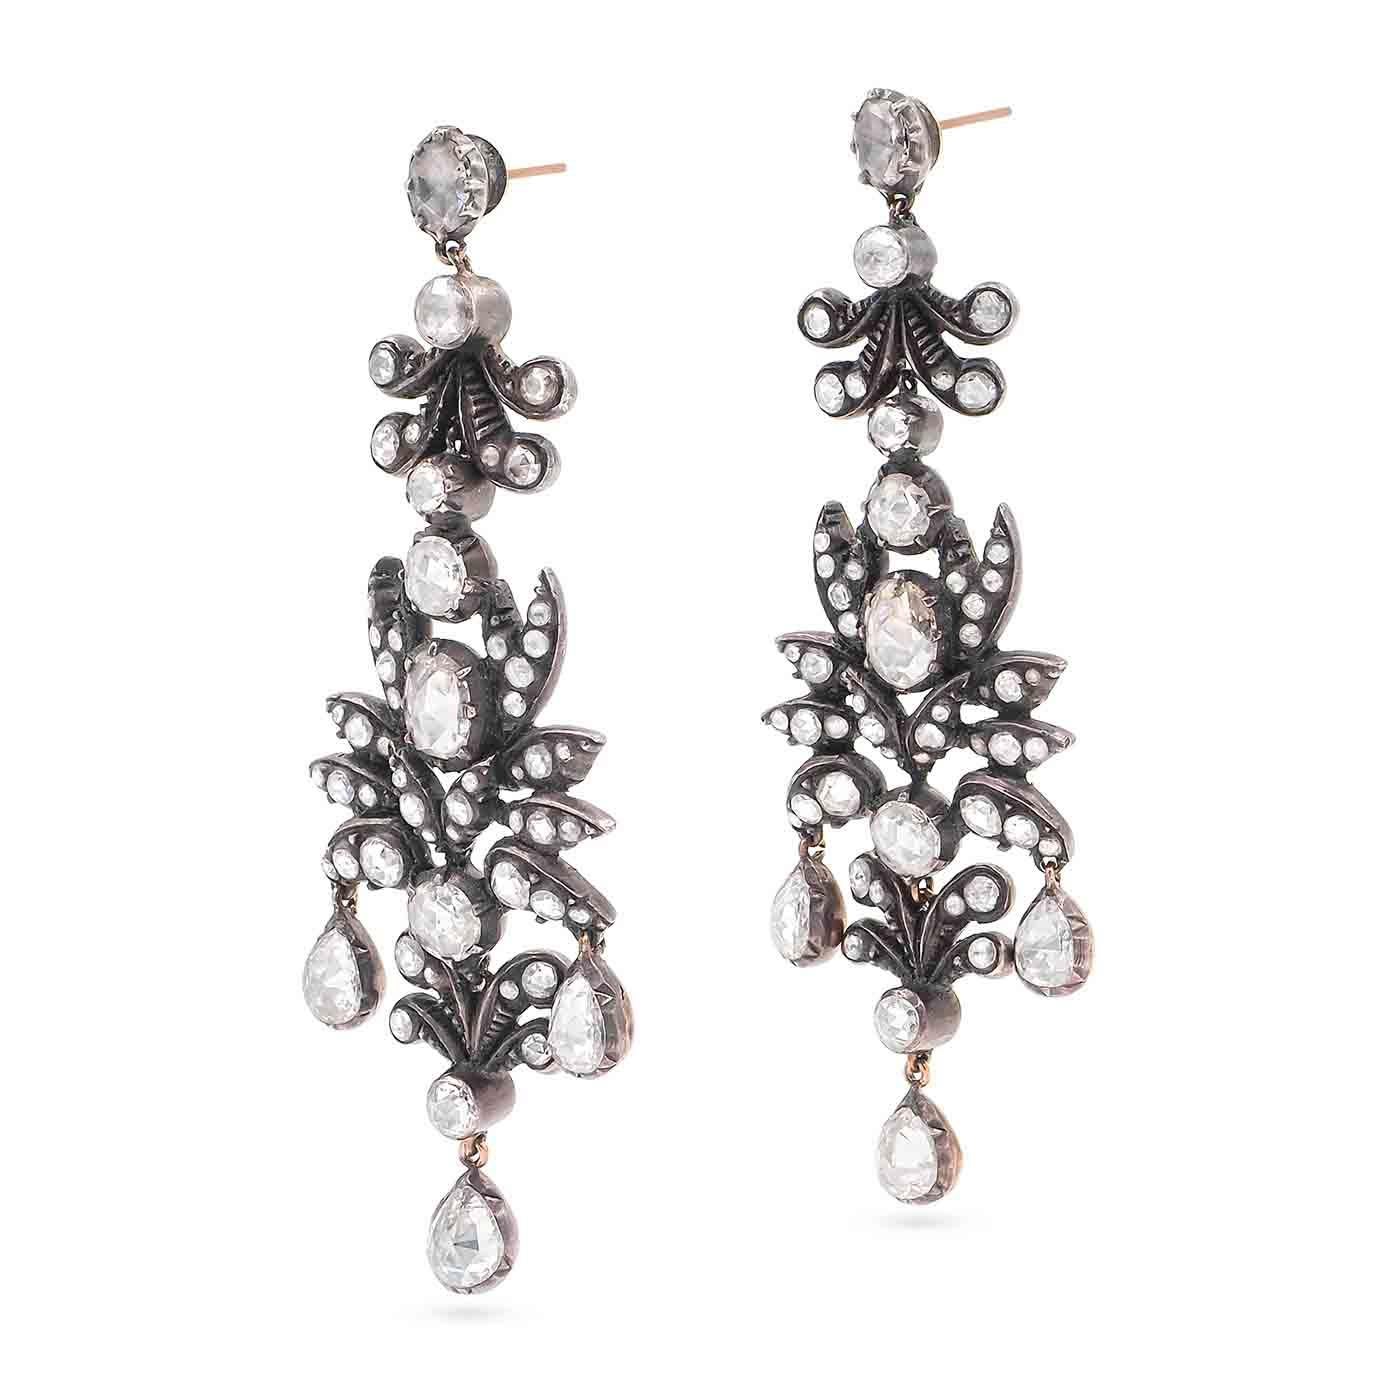 A magnificent pair of Georgian era Rose Cut Diamond Girandole 'Chandelier' Earrings composed of 15k gold and silver. Featuring 106 Rose Cut diamonds weighing approximately 5.50 carats in total -- 6 pear-shaped Rose Cut diamonds weighing